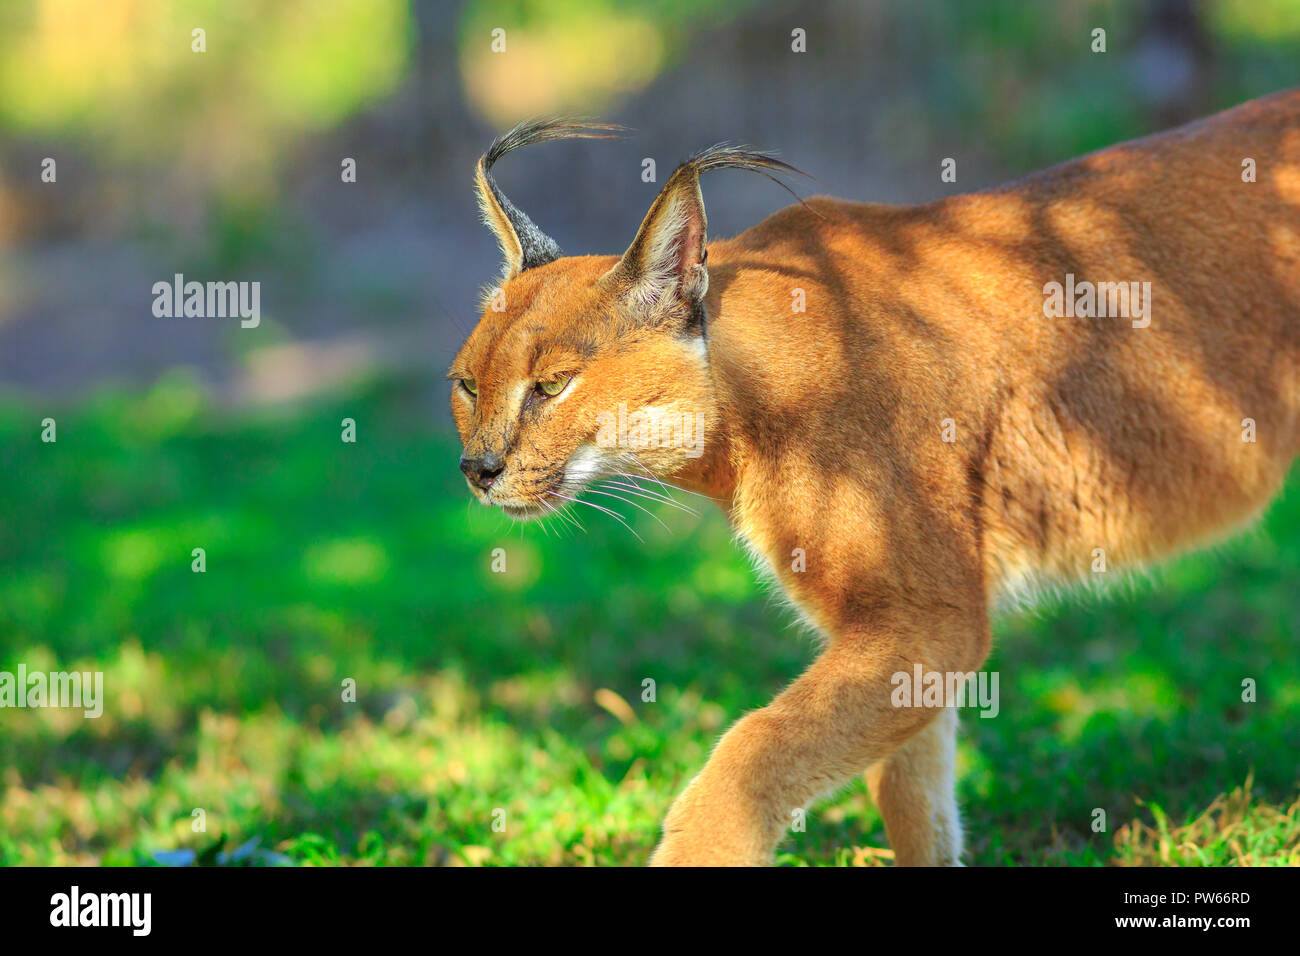 Closeup of Caracal, African lynx. Desert cat walking in green grass vegetation. Wild cat in nature, South Africa. Adult Caracal Caracal outdoor. Felis caracal in blurred background. Stock Photo